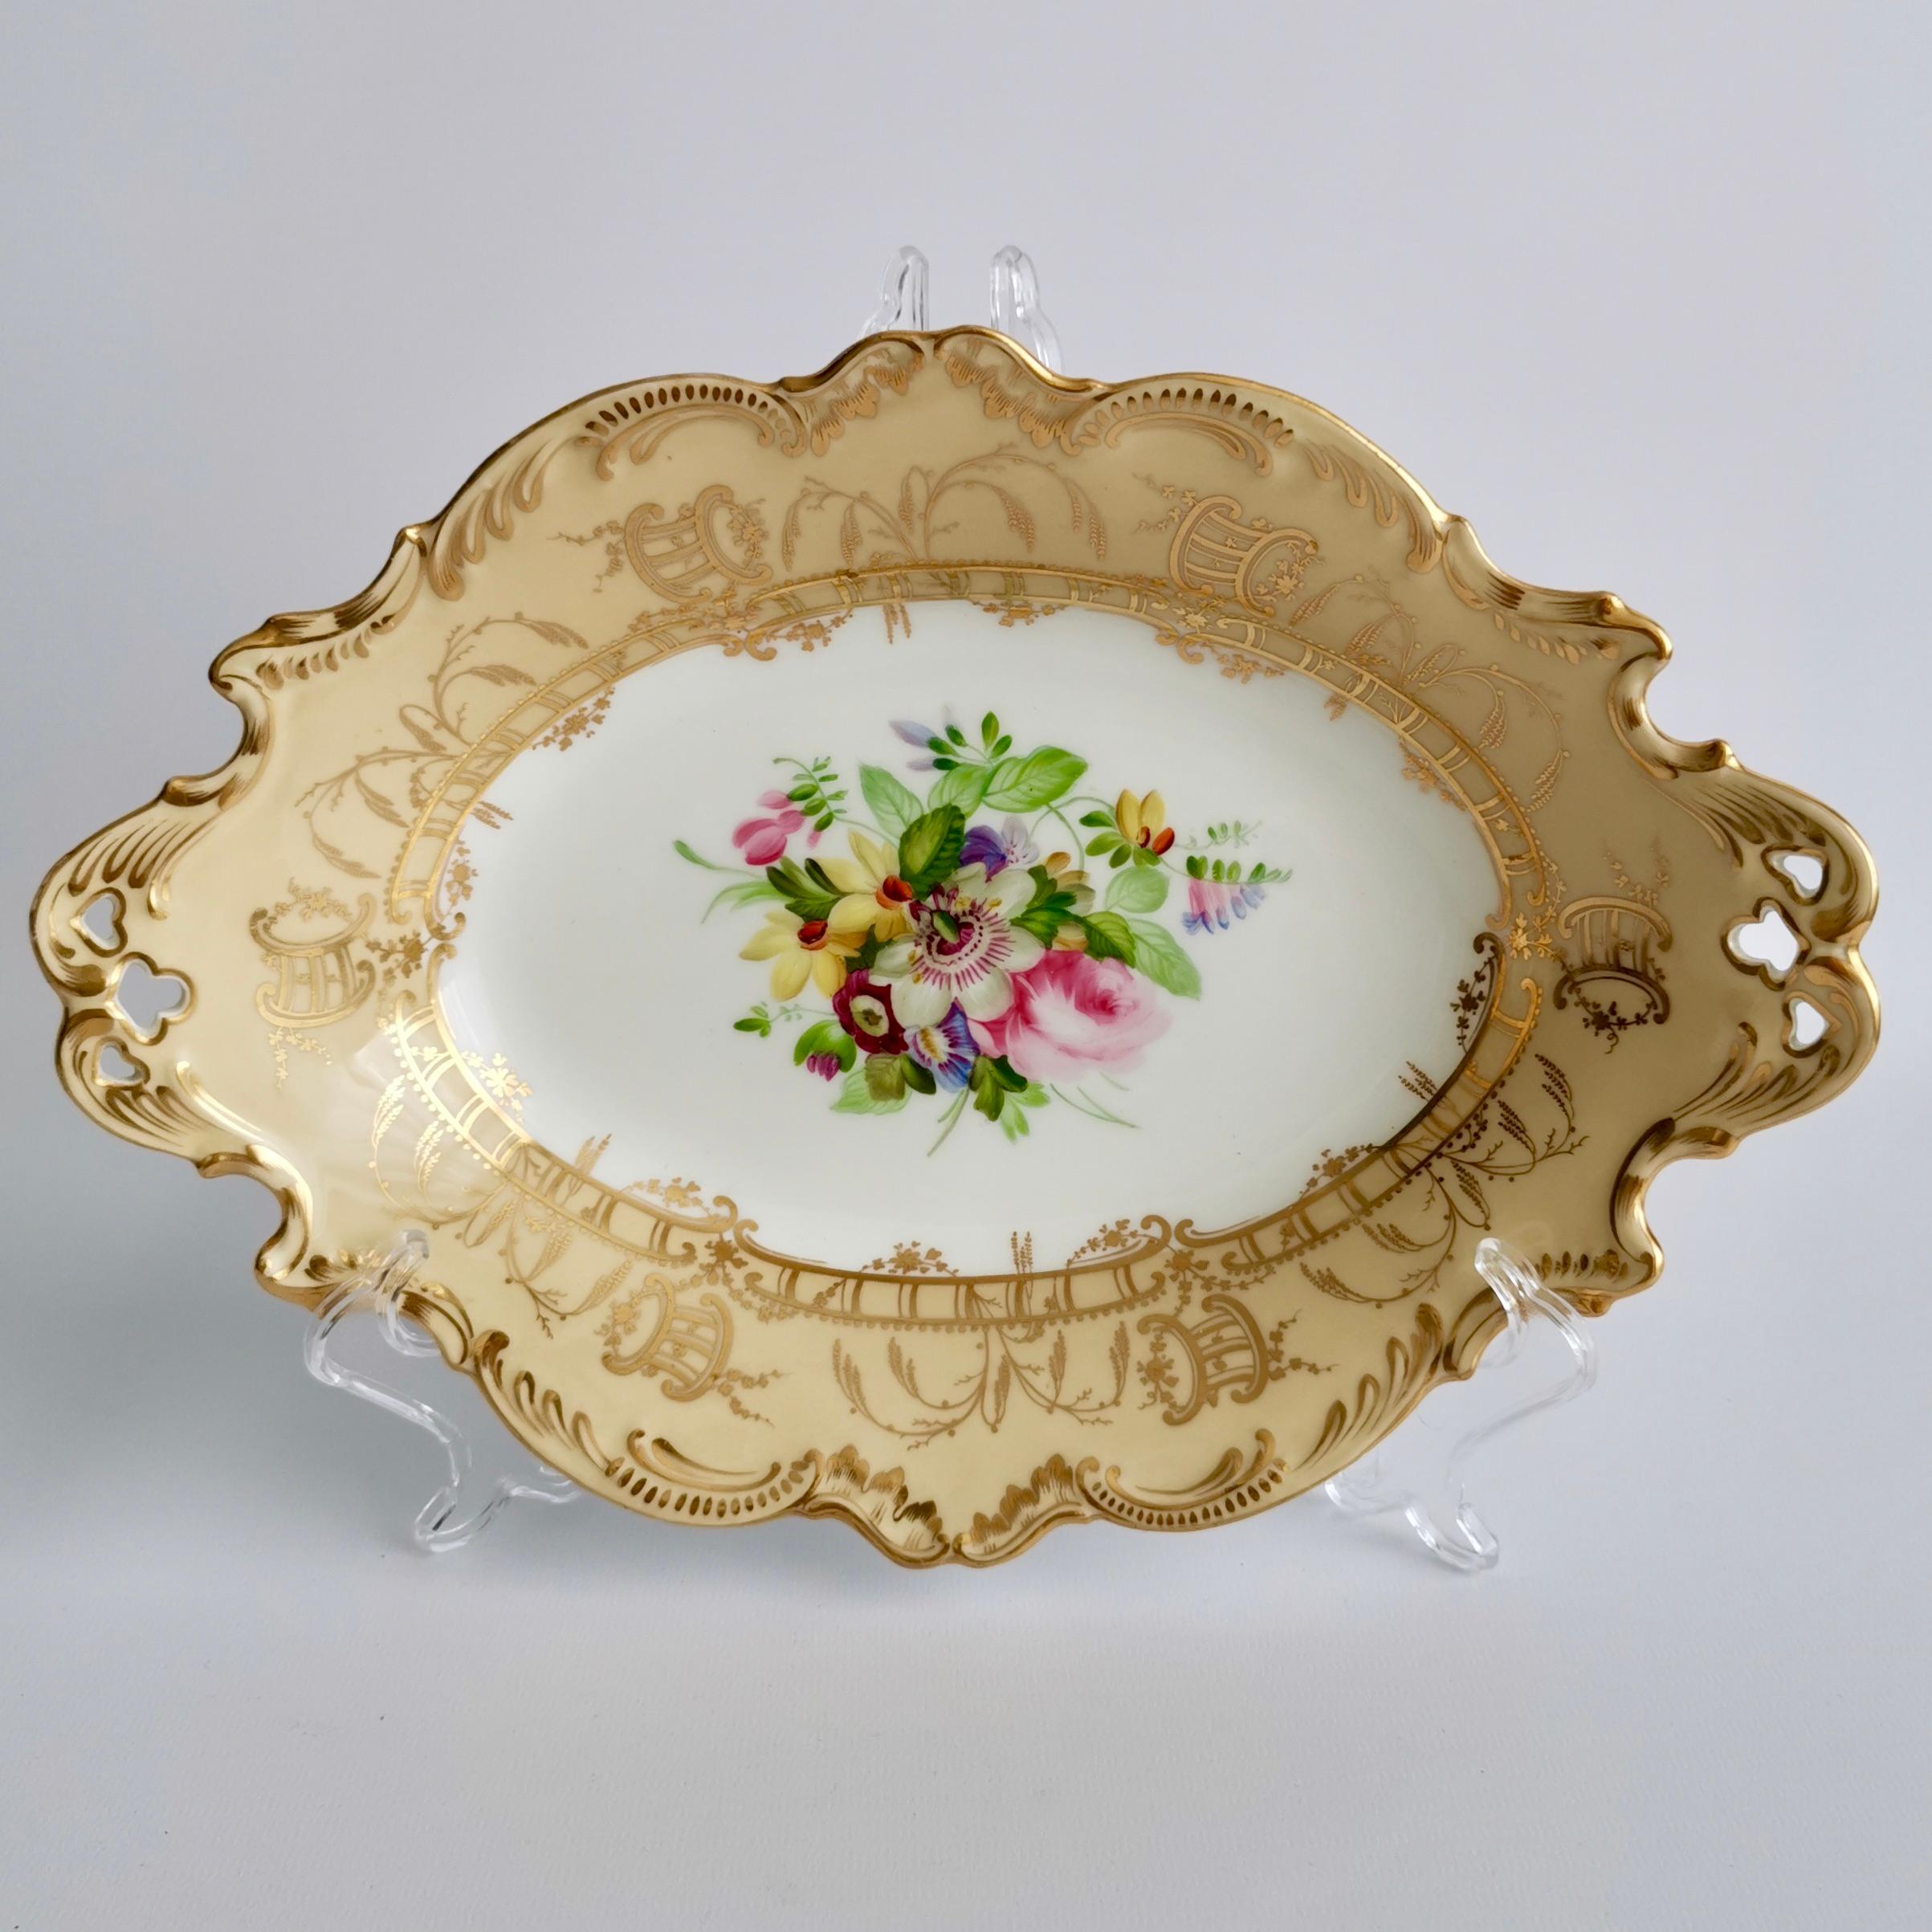 Victorian Coalport Set of 2 Oval Dessert Dishes, Beige with Flowers by Thomas Dixon, 1847